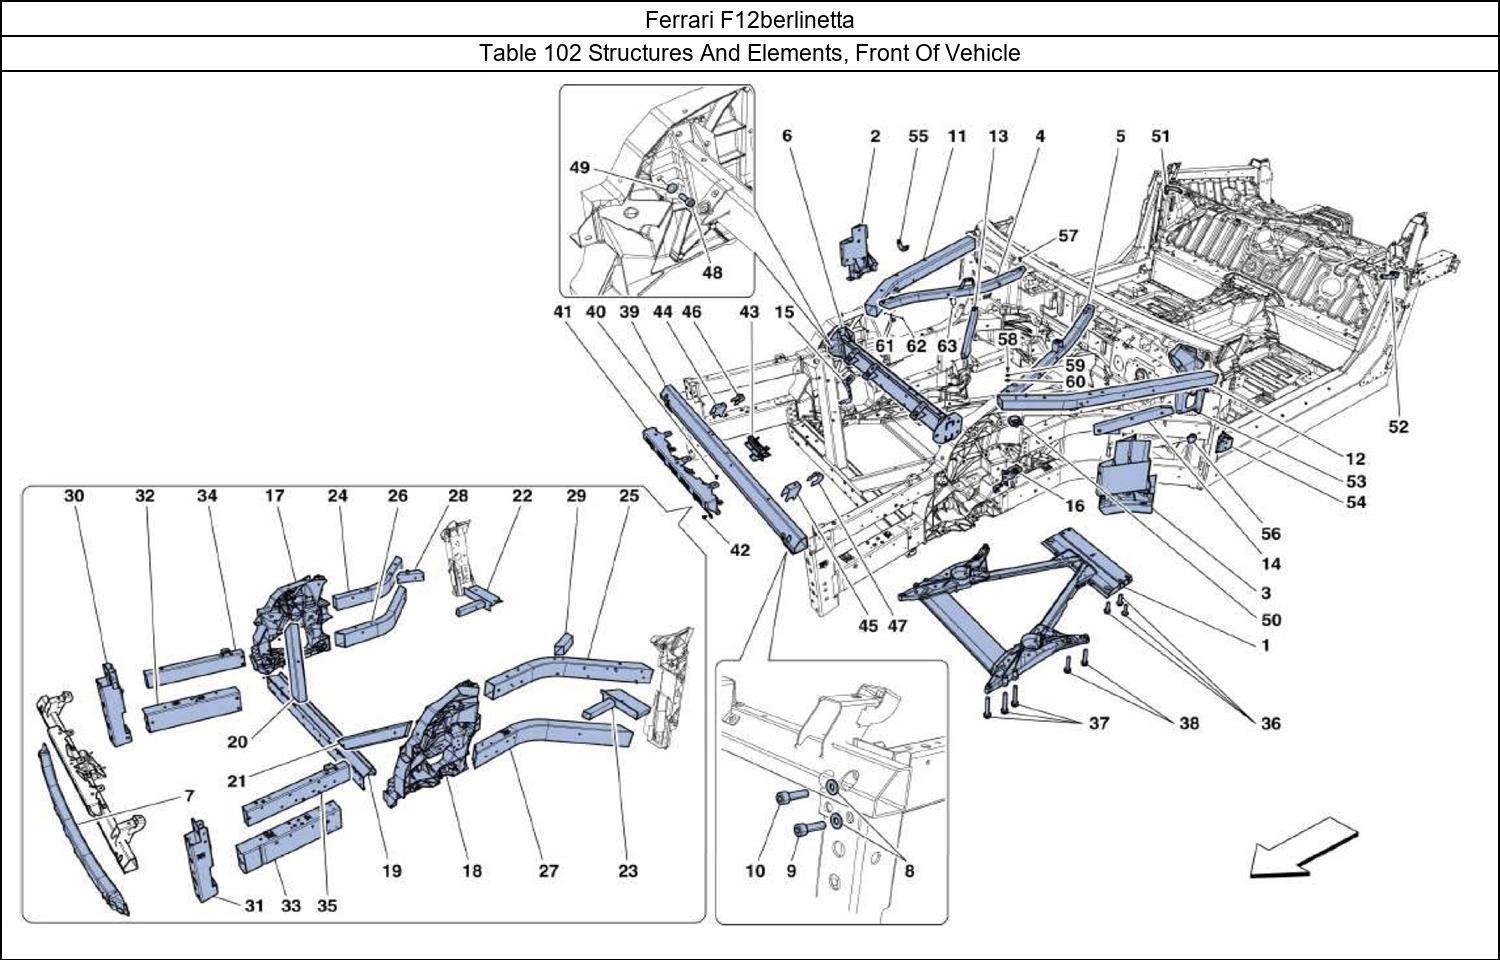 Ferrari Parts Ferrari F12berlinetta Table 102 Structures And Elements, Front Of Vehicle